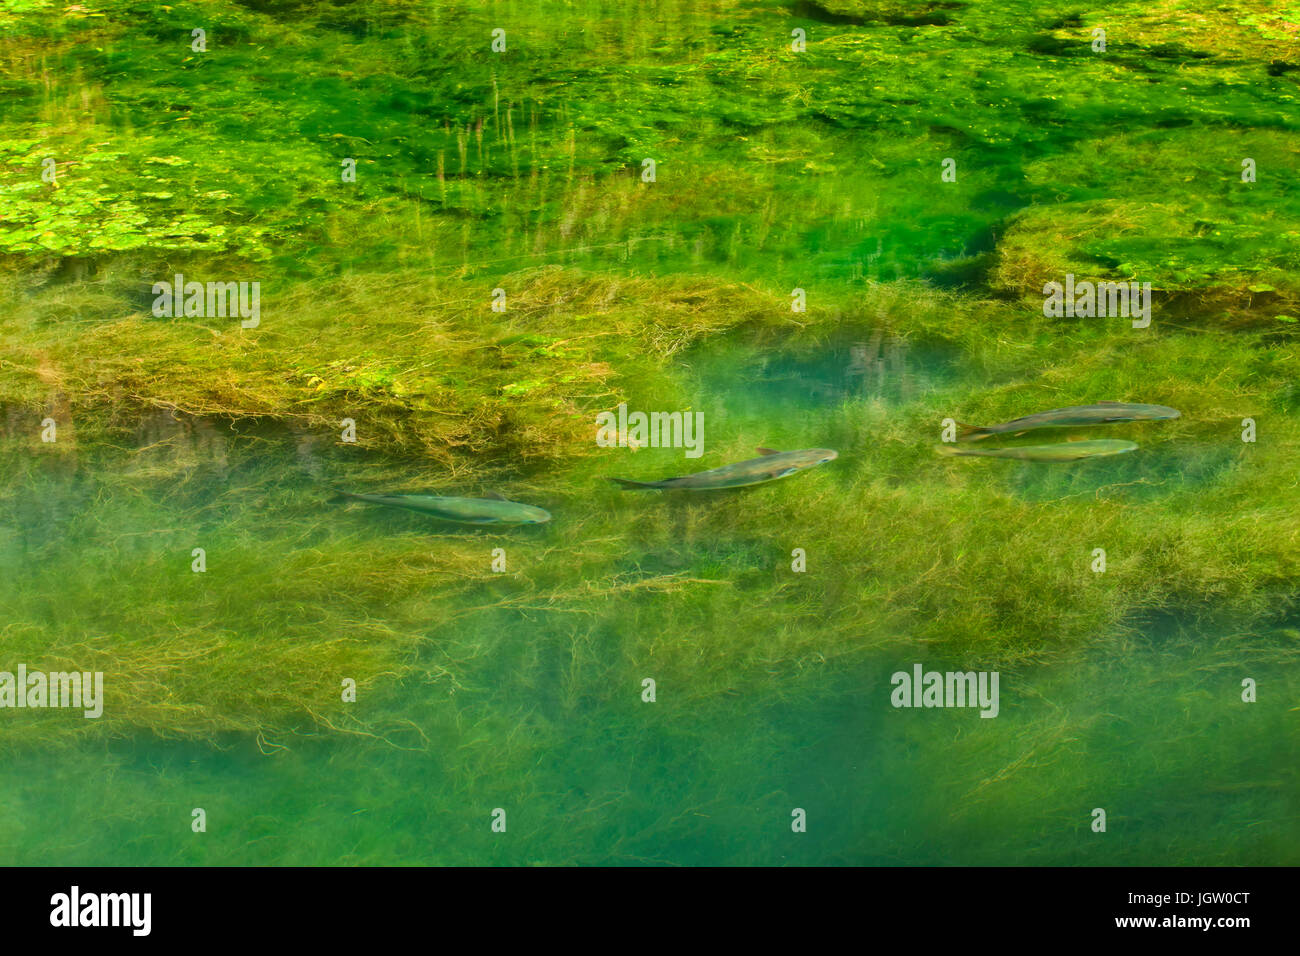 group of big fish swimming in mountain river full of  green seaweed Stock Photo